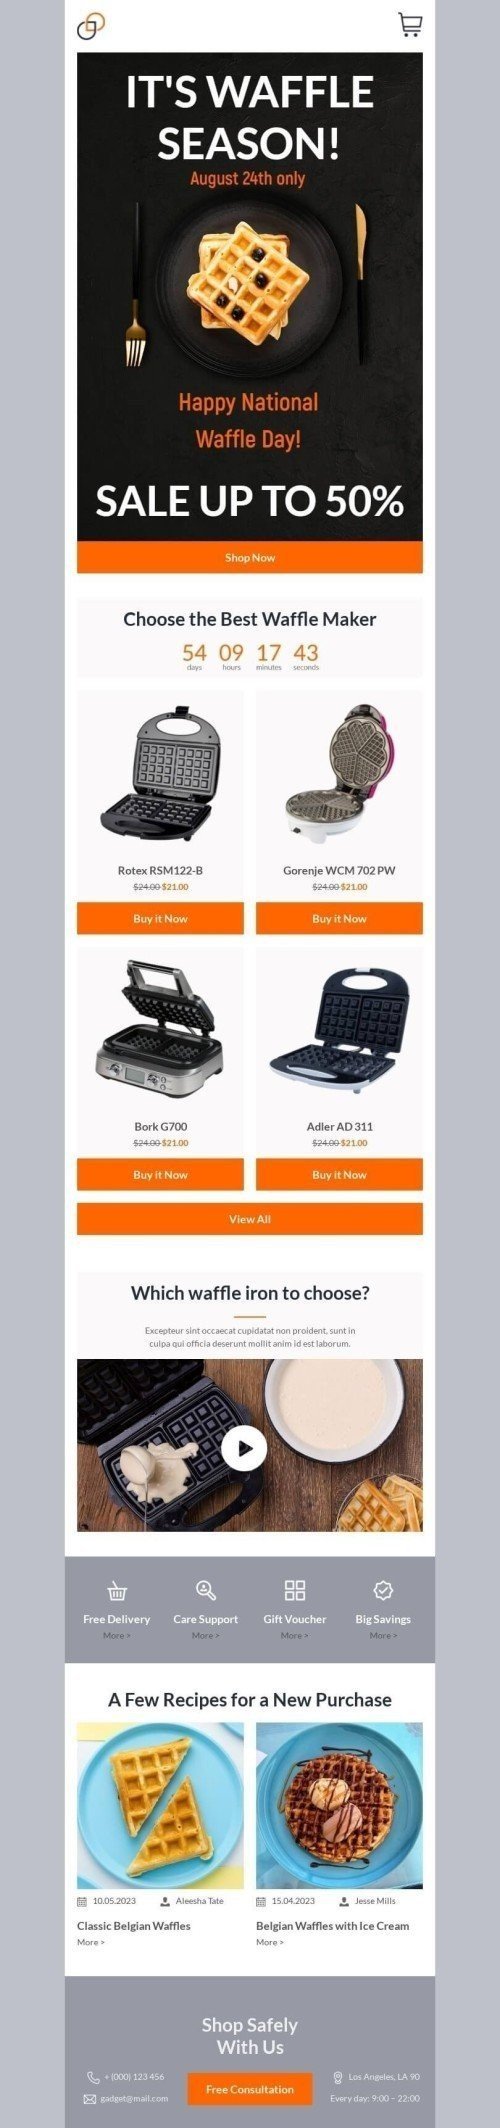 National Waffle Day Email Template "Best Waffle Maker" for Gadgets industry mobile view